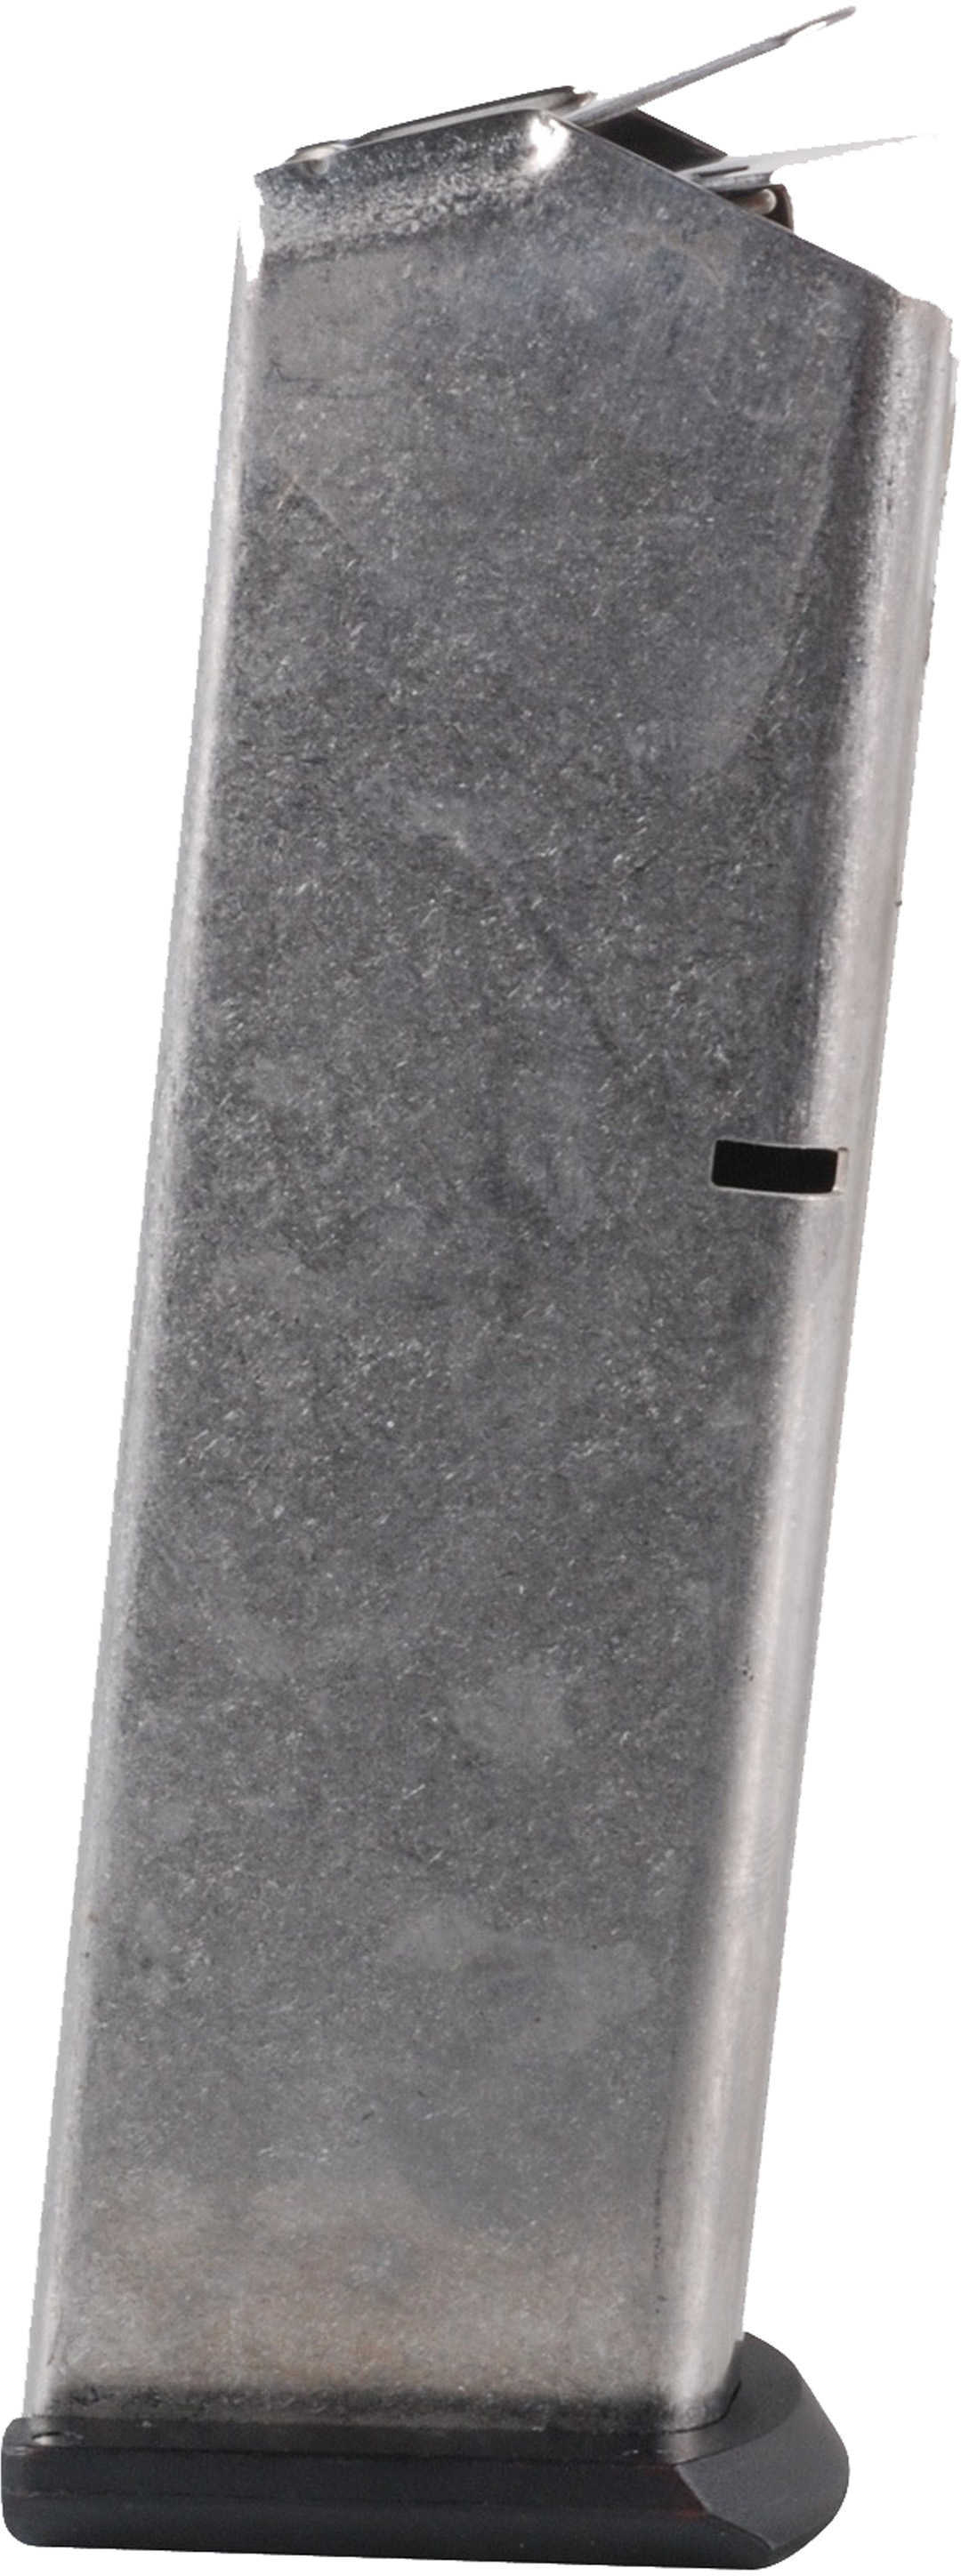 Mag Ruger P345 45ACP 8Rd STS 90230-img-1